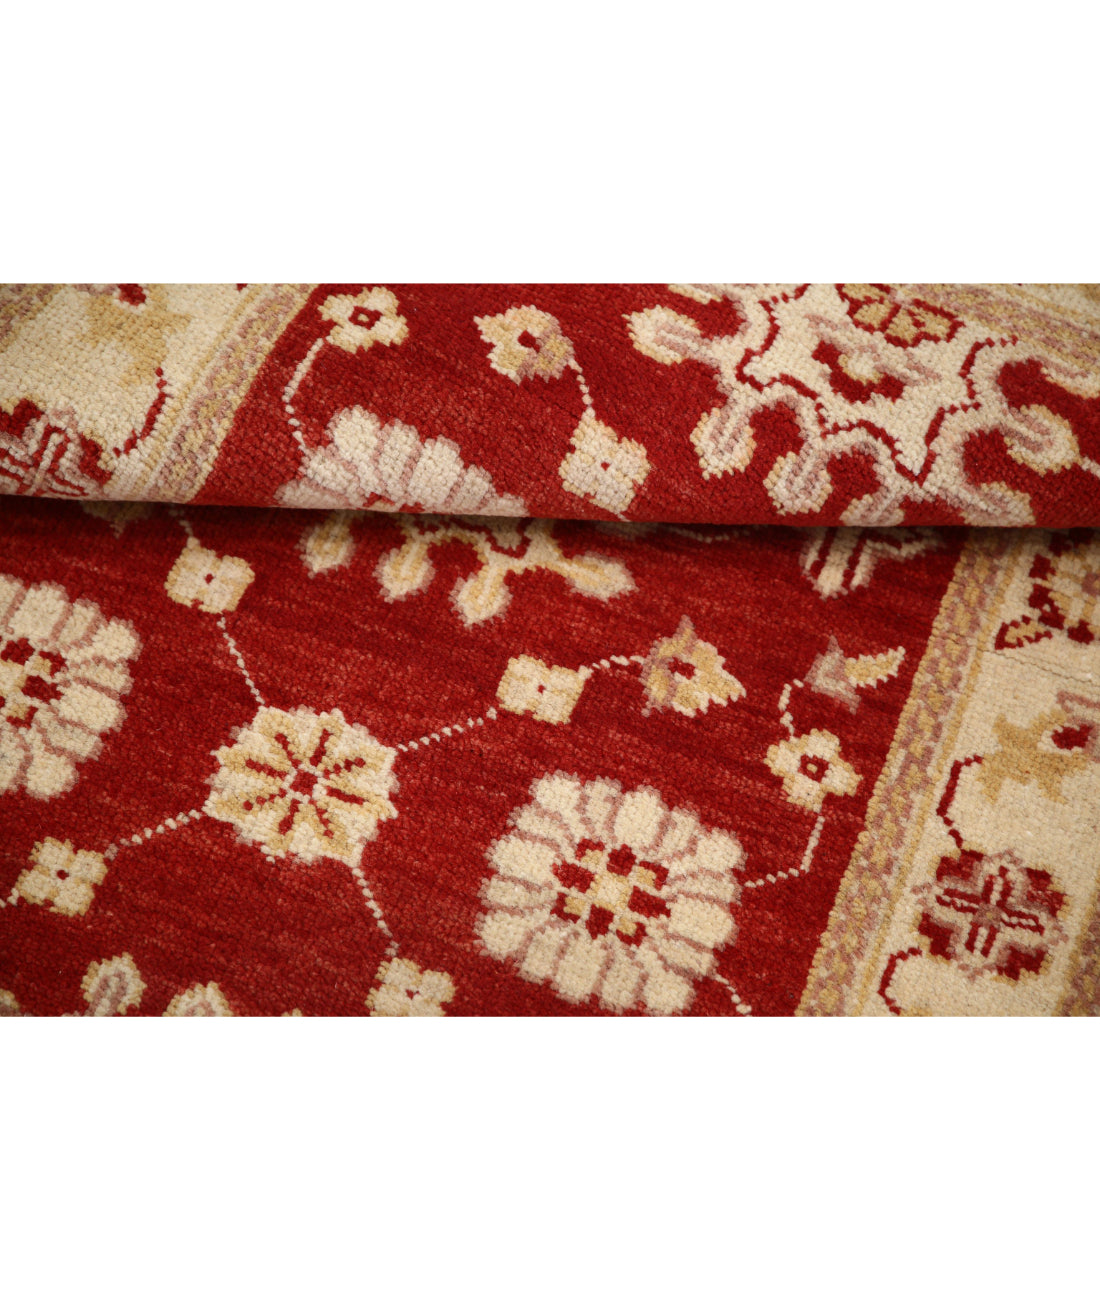 Ziegler 2'6'' X 4'0'' Hand-Knotted Wool Rug 2'6'' x 4'0'' (75 X 120) / Red / N/A